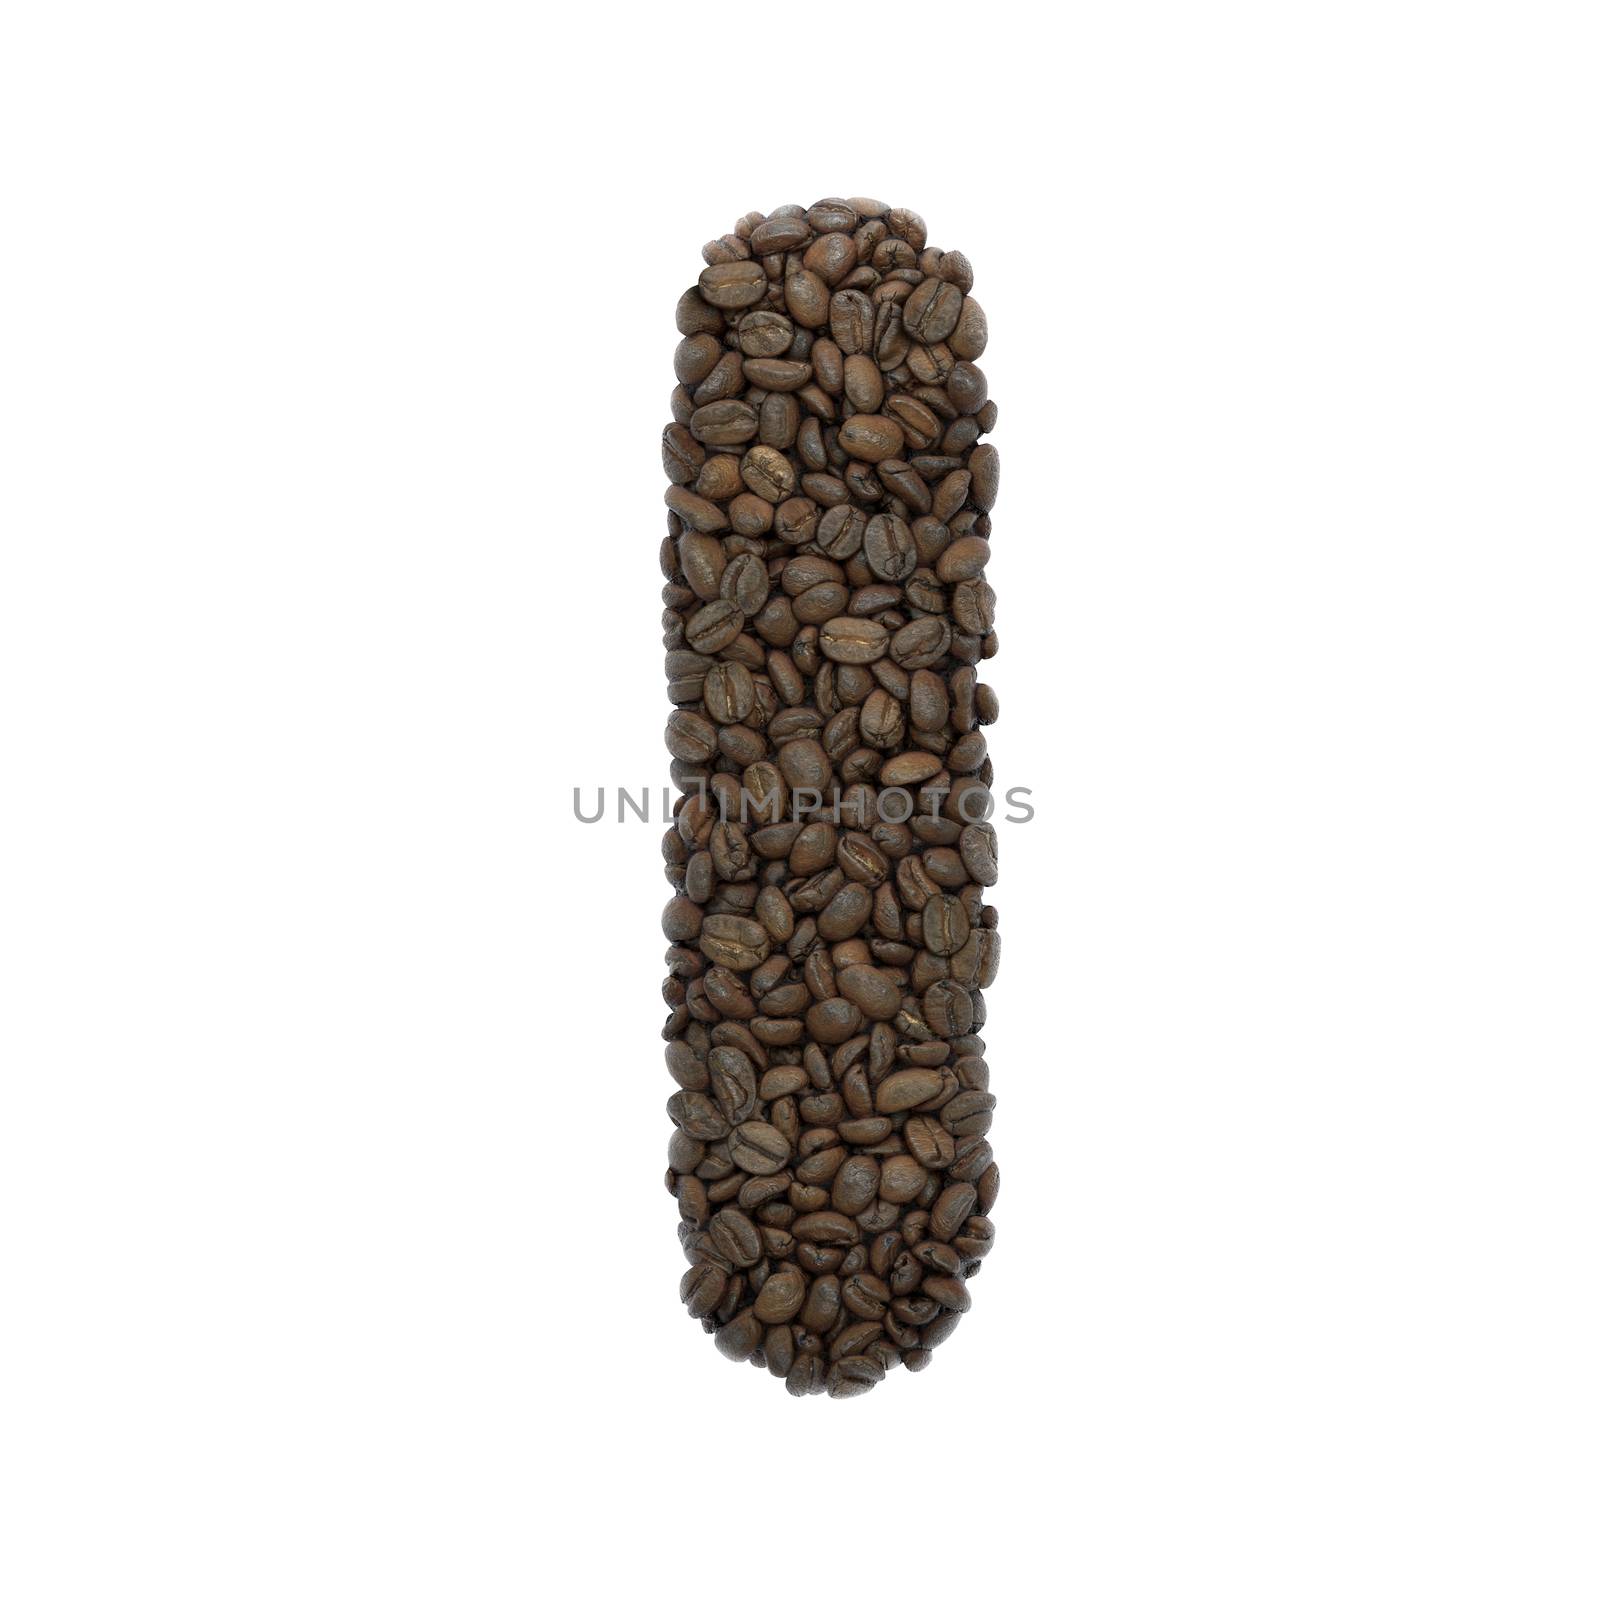 Coffee letter I - Capital 3d roasted beans font - suitable for Coffee, energy or insomnia related subjects by chrisroll